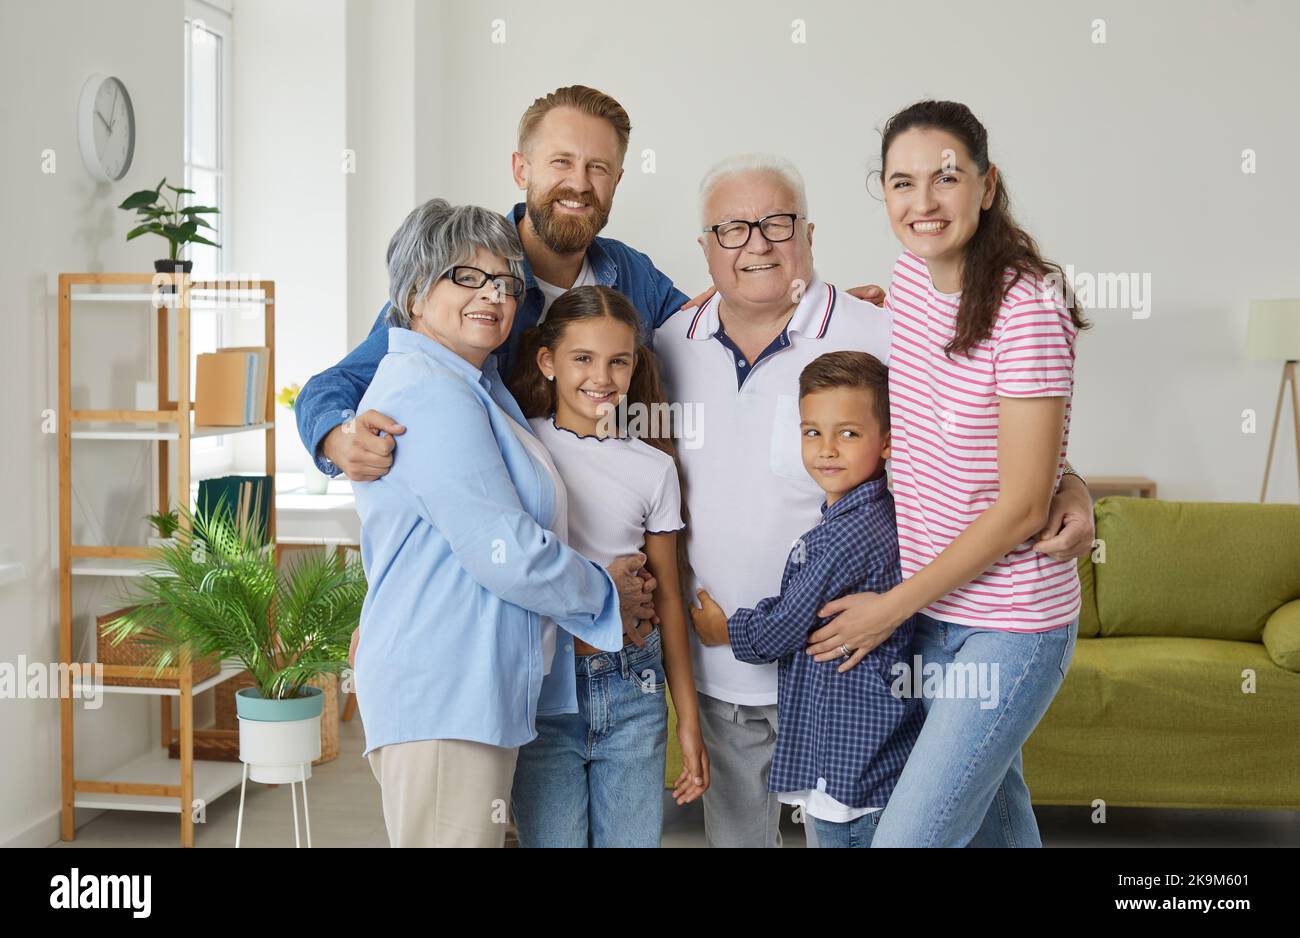 Portrait of happy family with three generations from grandchildren to parents and grandparents. Stock Photo